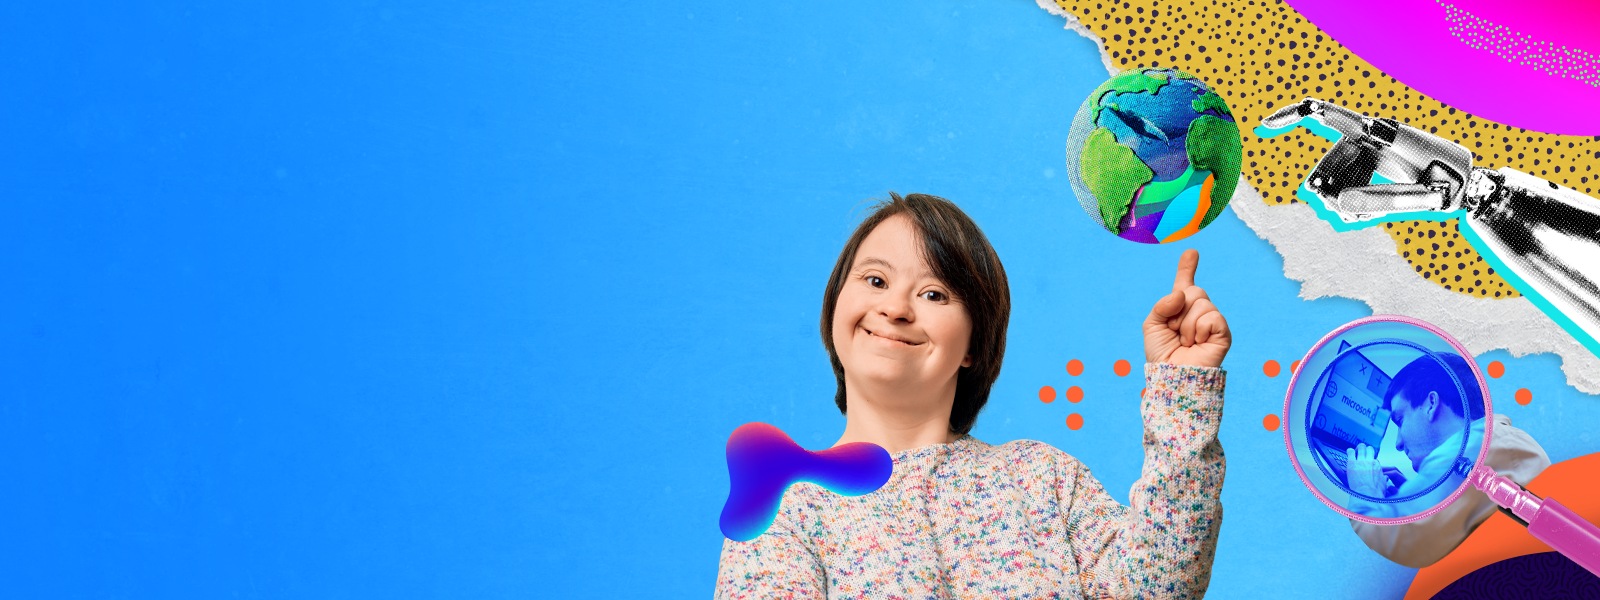 A collage featuring a smiling person and a robotic hand pointing to an illustration of Planet Earth. In the background, a magnifying glass shows a person using the magnification feature on a laptop. 